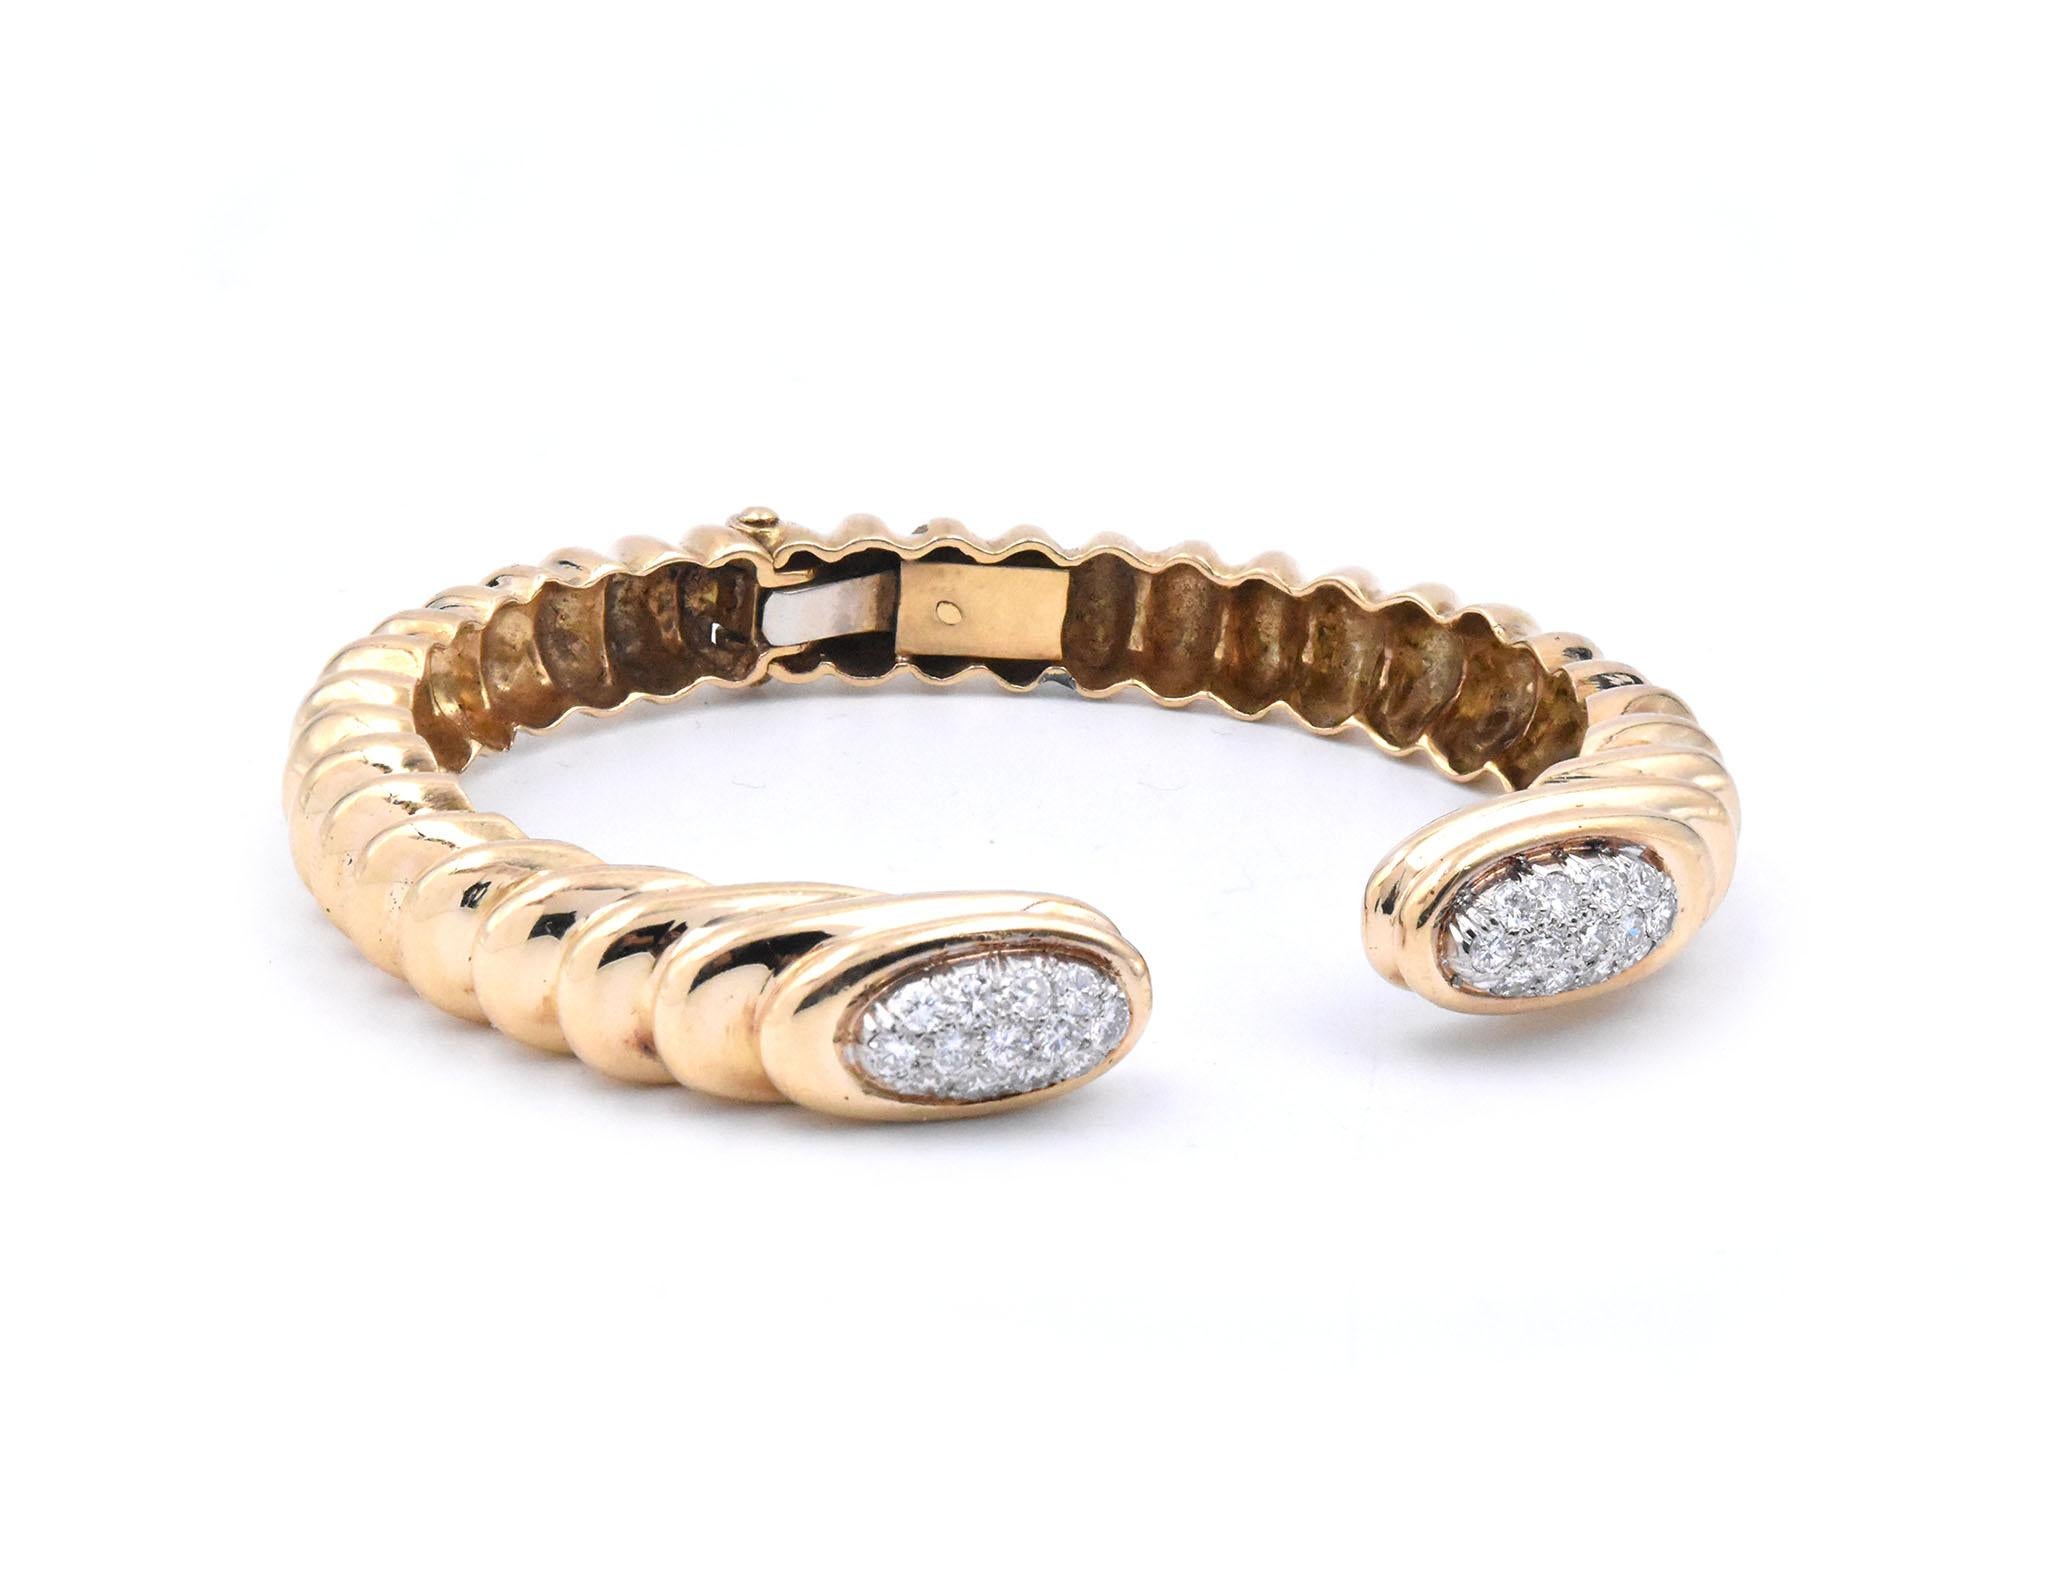 Material: 18K yellow gold
Diamonds:  26 round brilliant cut = 1.20cttw
Color: G
Clarity: SI1
Dimensions: bracelet will fit up to a 7-inch wrist
Weight: 39.41 grams